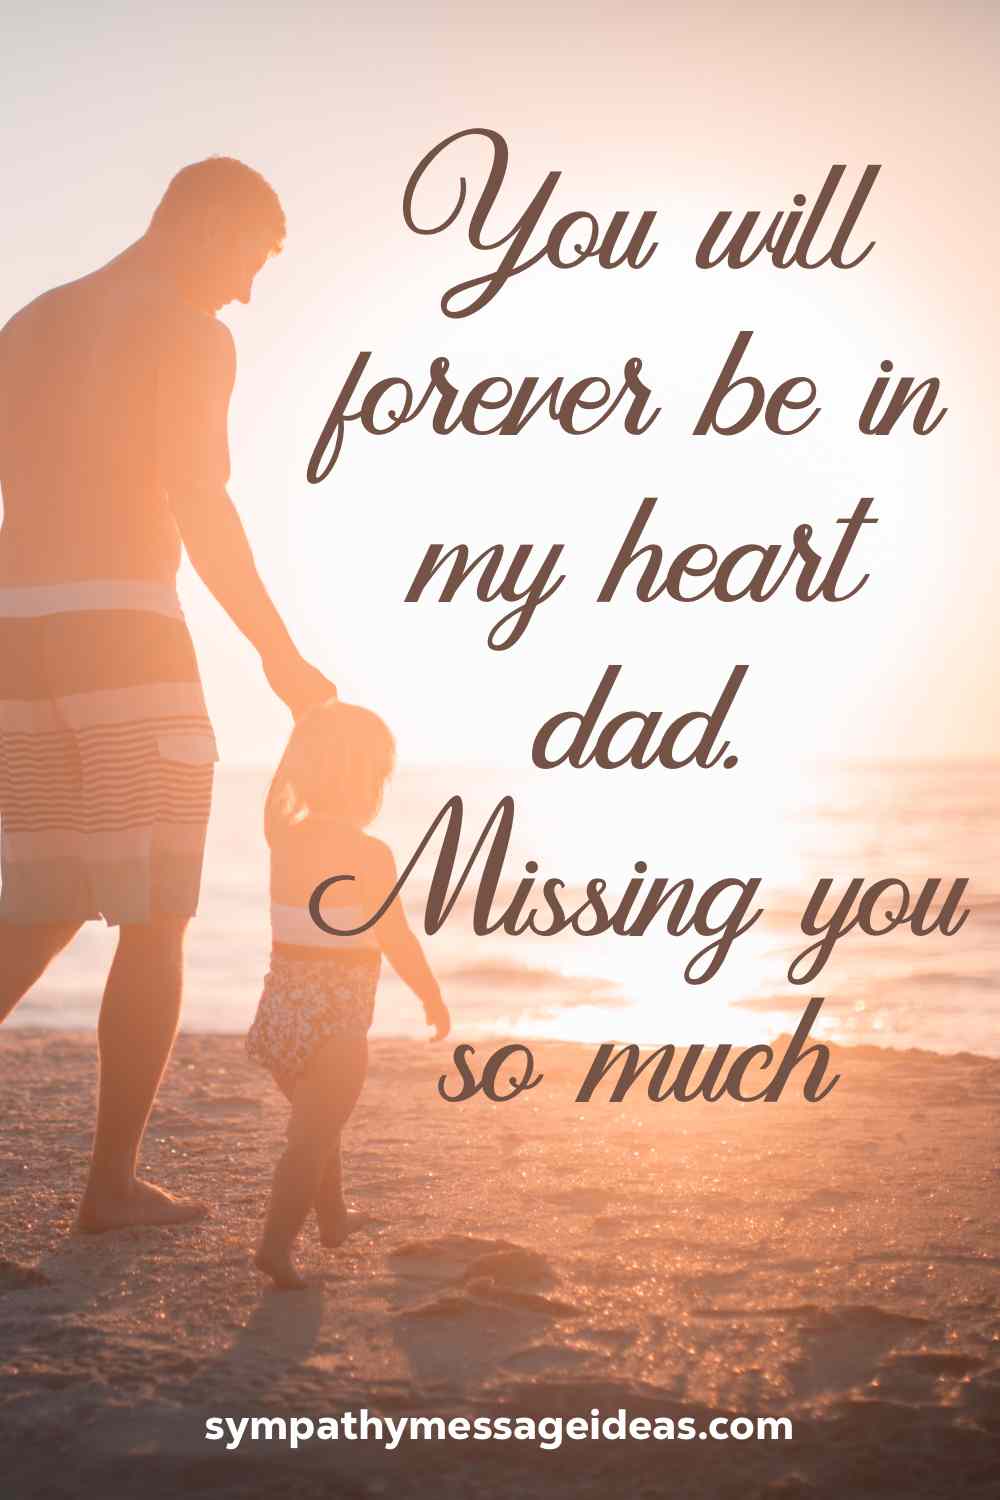 dad quotes from daughter miss you